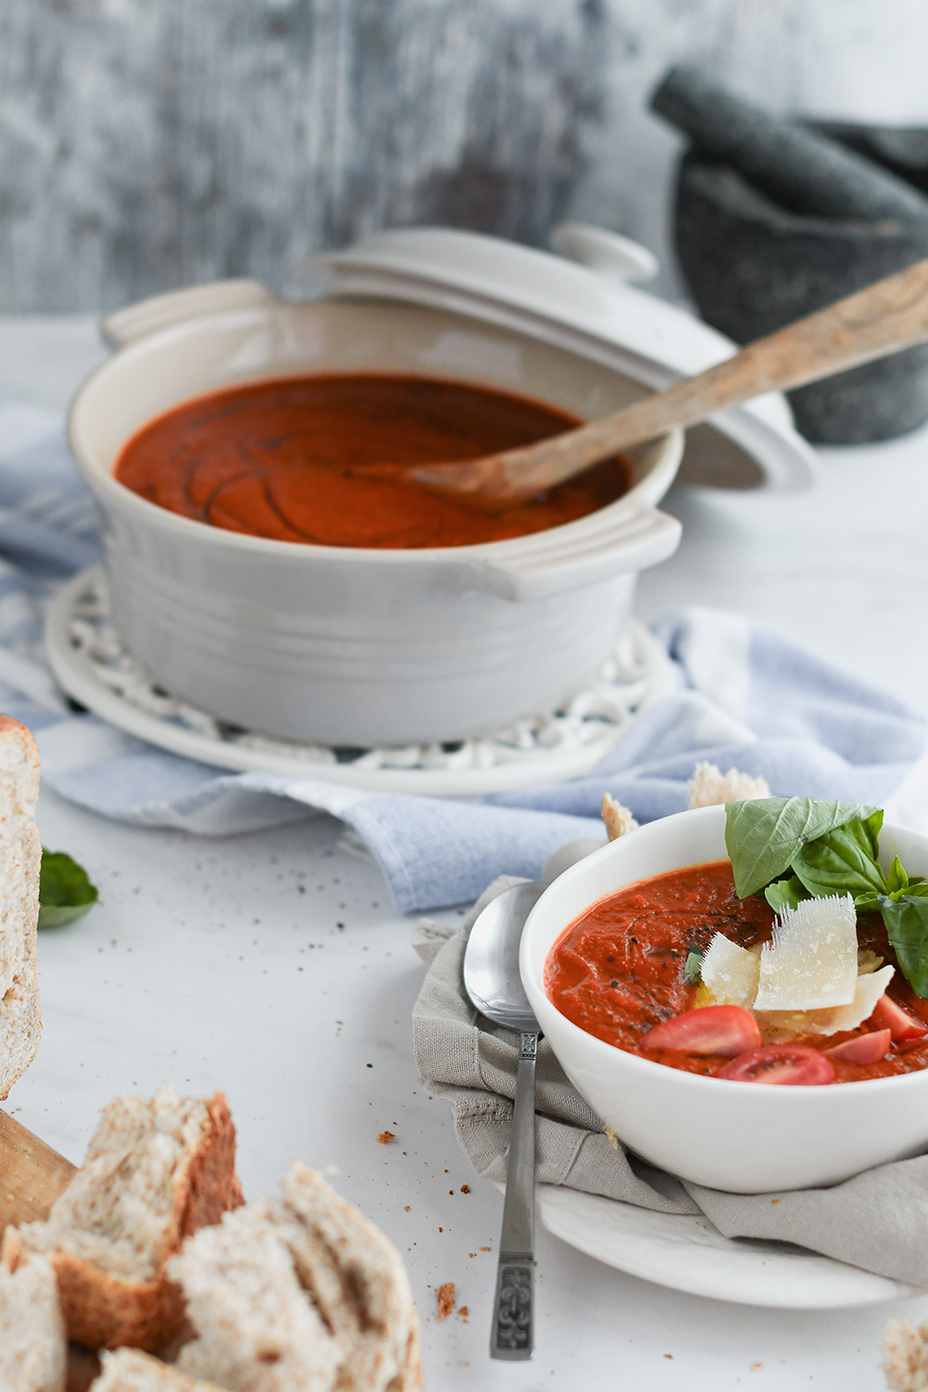 Tomato, red pepper and lentil soup